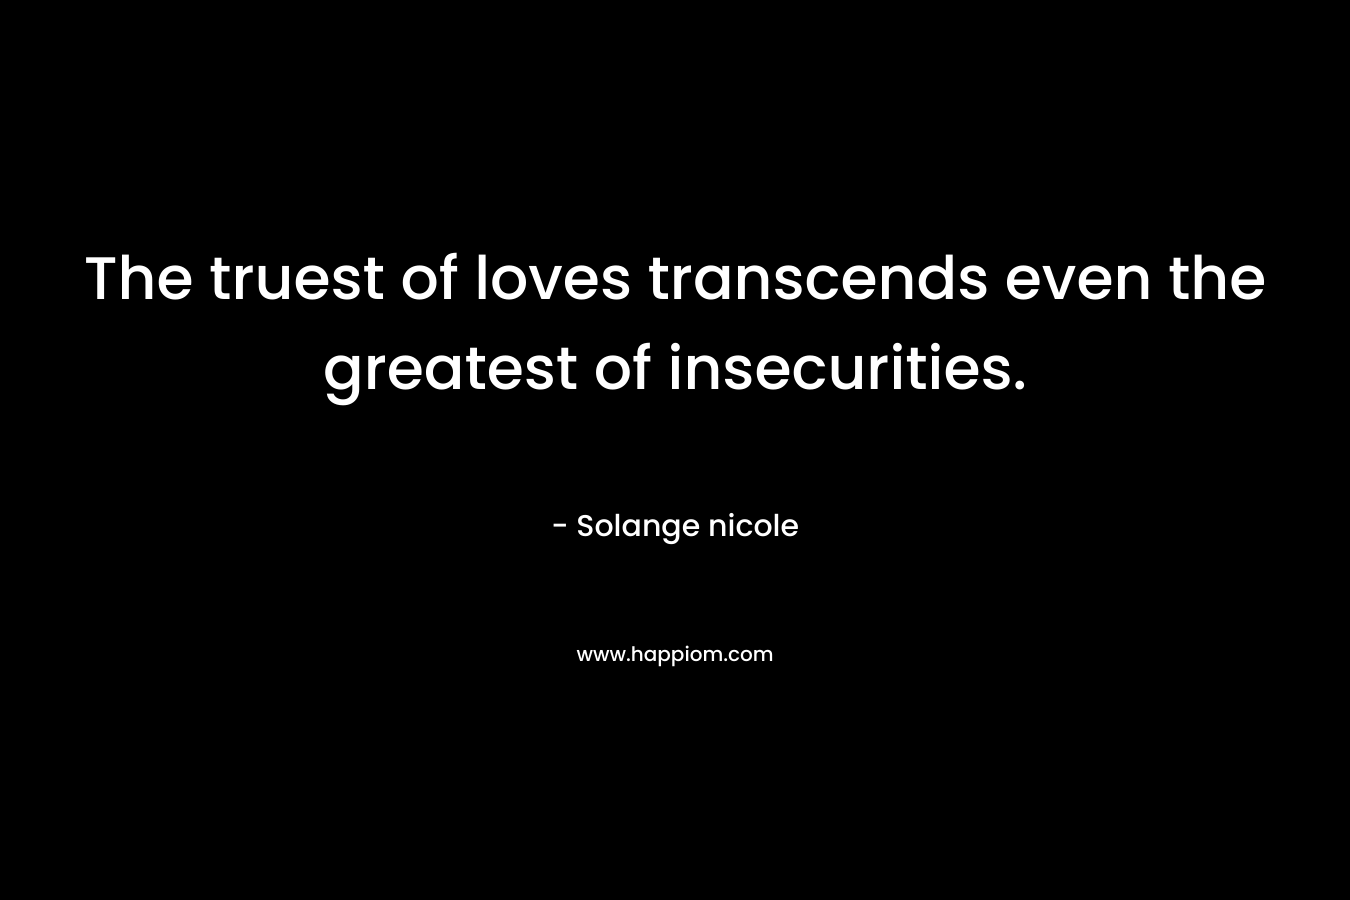 The truest of loves transcends even the greatest of insecurities. – Solange nicole